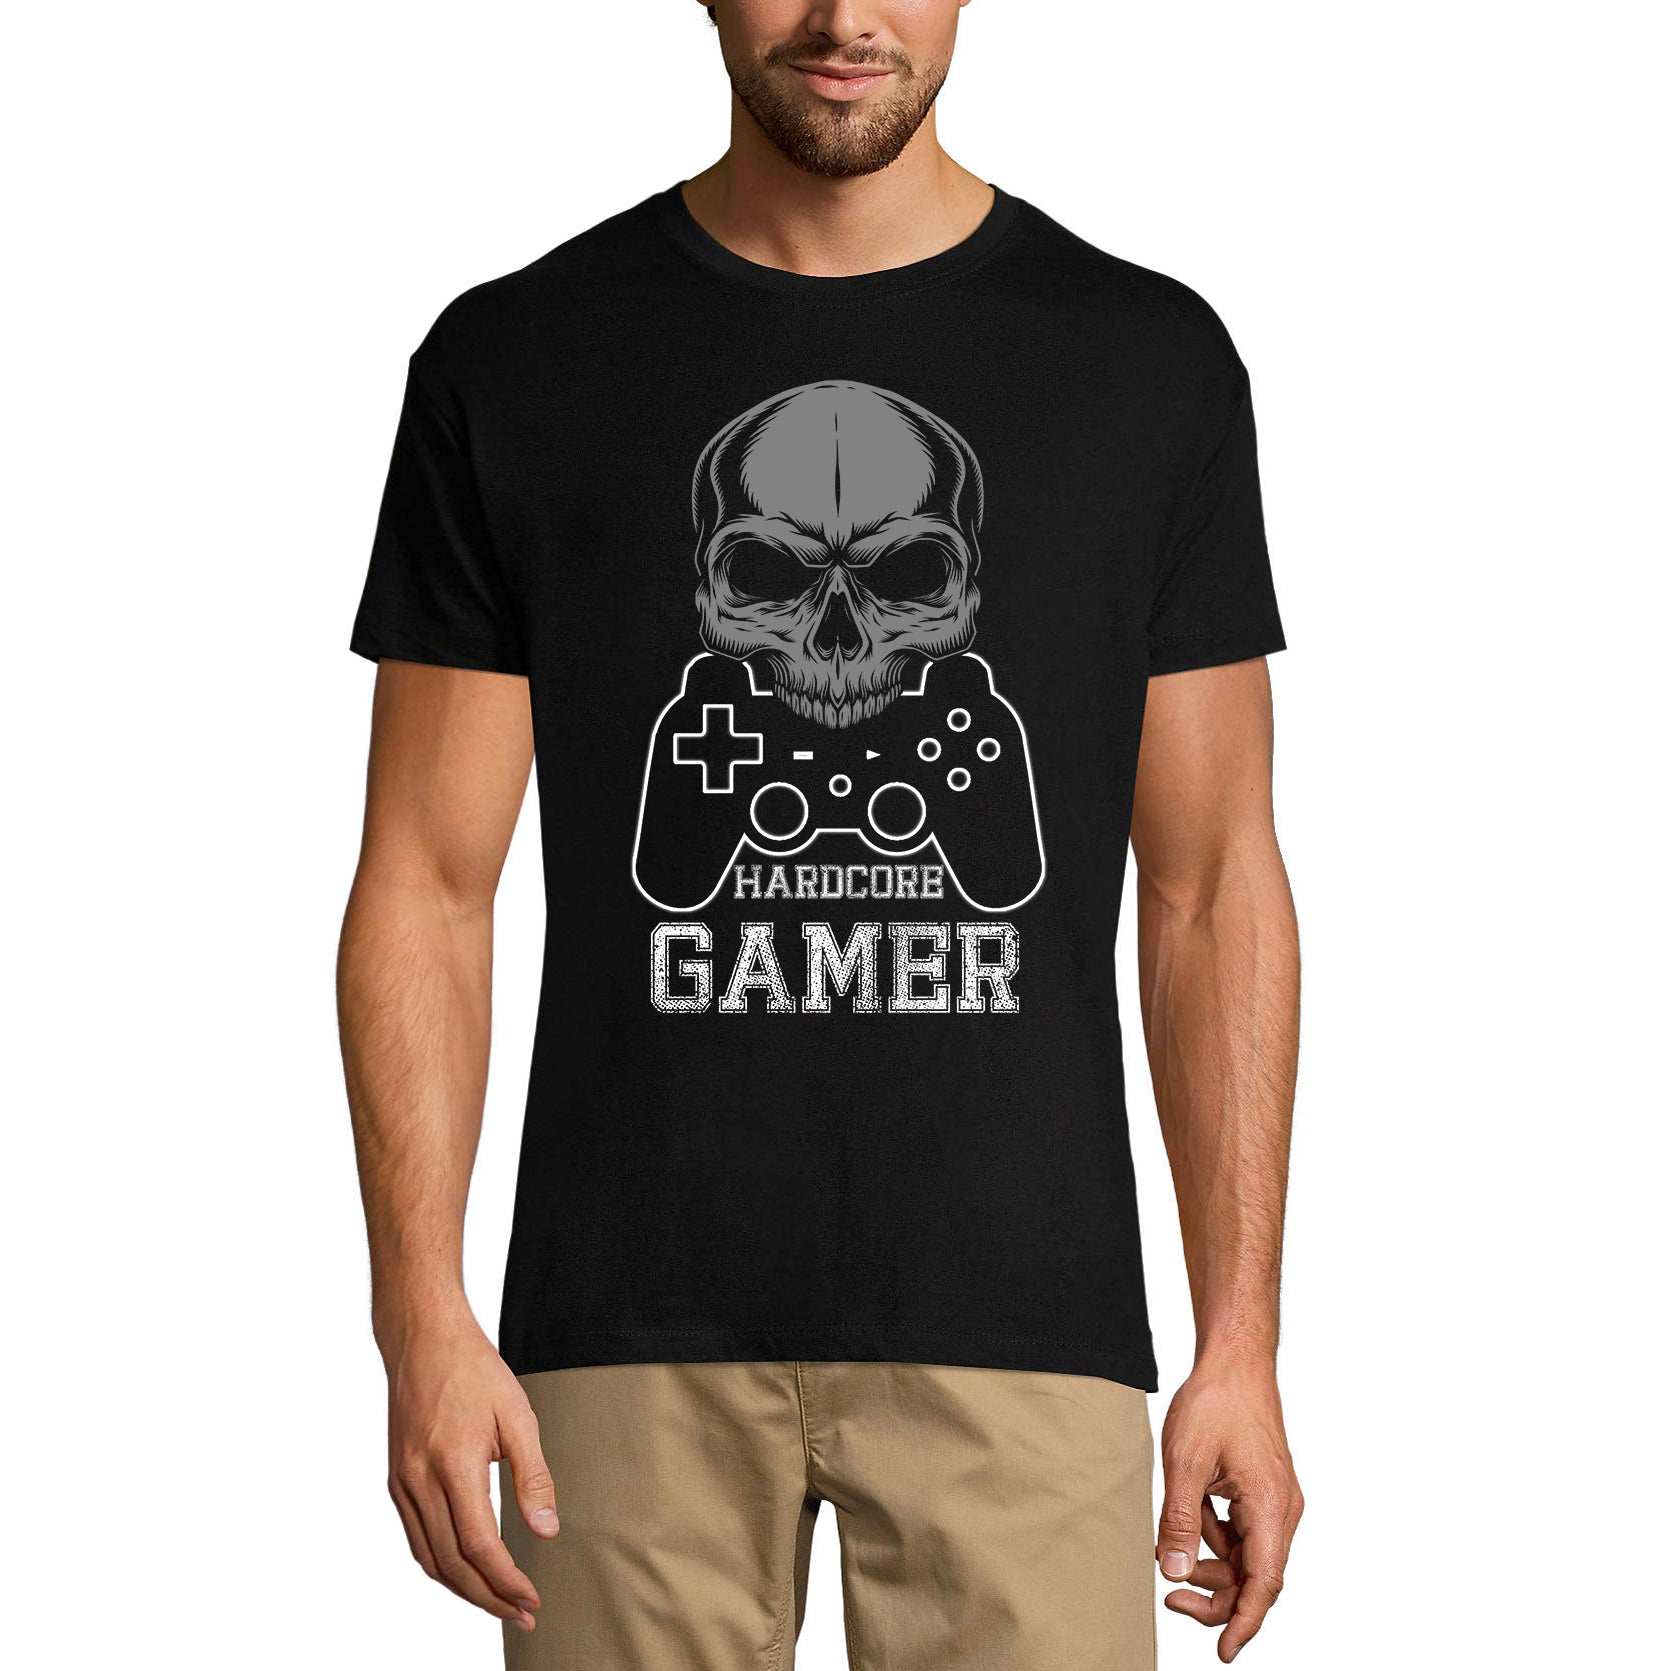 ULTRABASIC Men's Graphic T-Shirt Hardcore Gamer Skull - Playstation Gaming Apparel mode on level up dad gamer i paused my game alien player ufo playstation tee shirt clothes gaming apparel gifts super mario nintendo call of duty graphic tshirt video game funny geek gift for the gamer fortnite pubg humor son father birthday